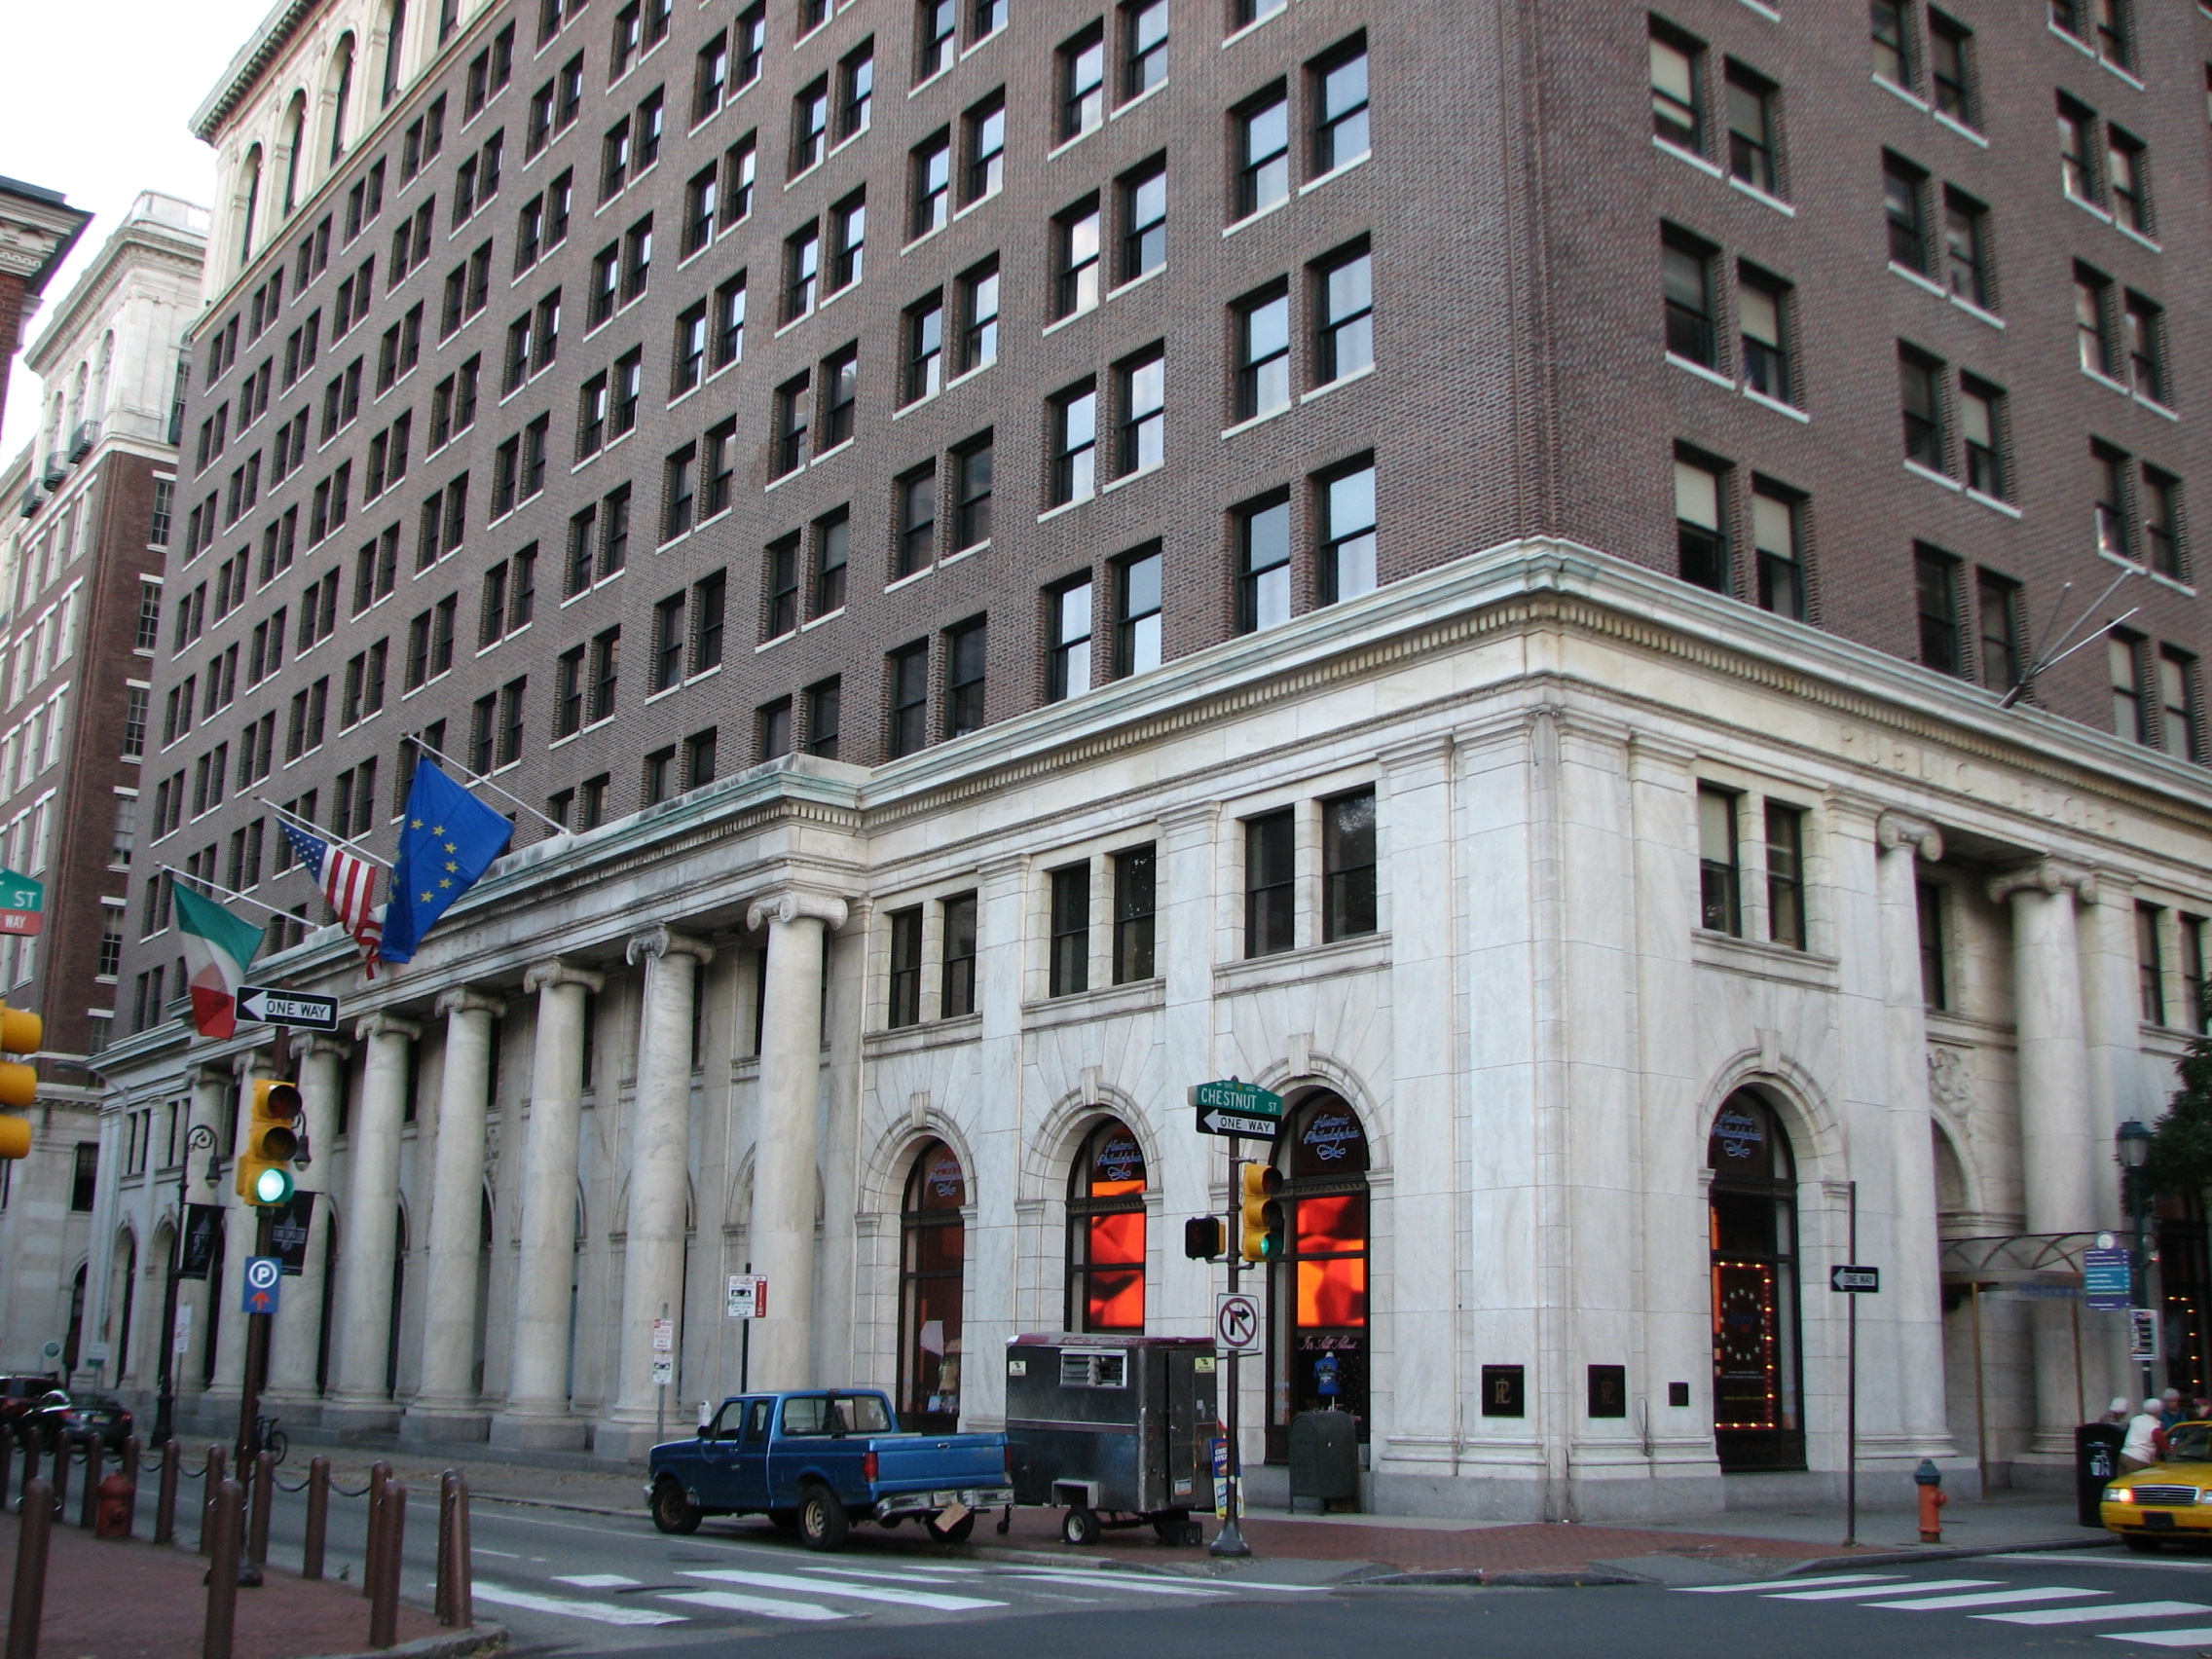 The Public Ledger Building, 6th and Chestnut Streets, was designed by architect Horace Trumbauer.